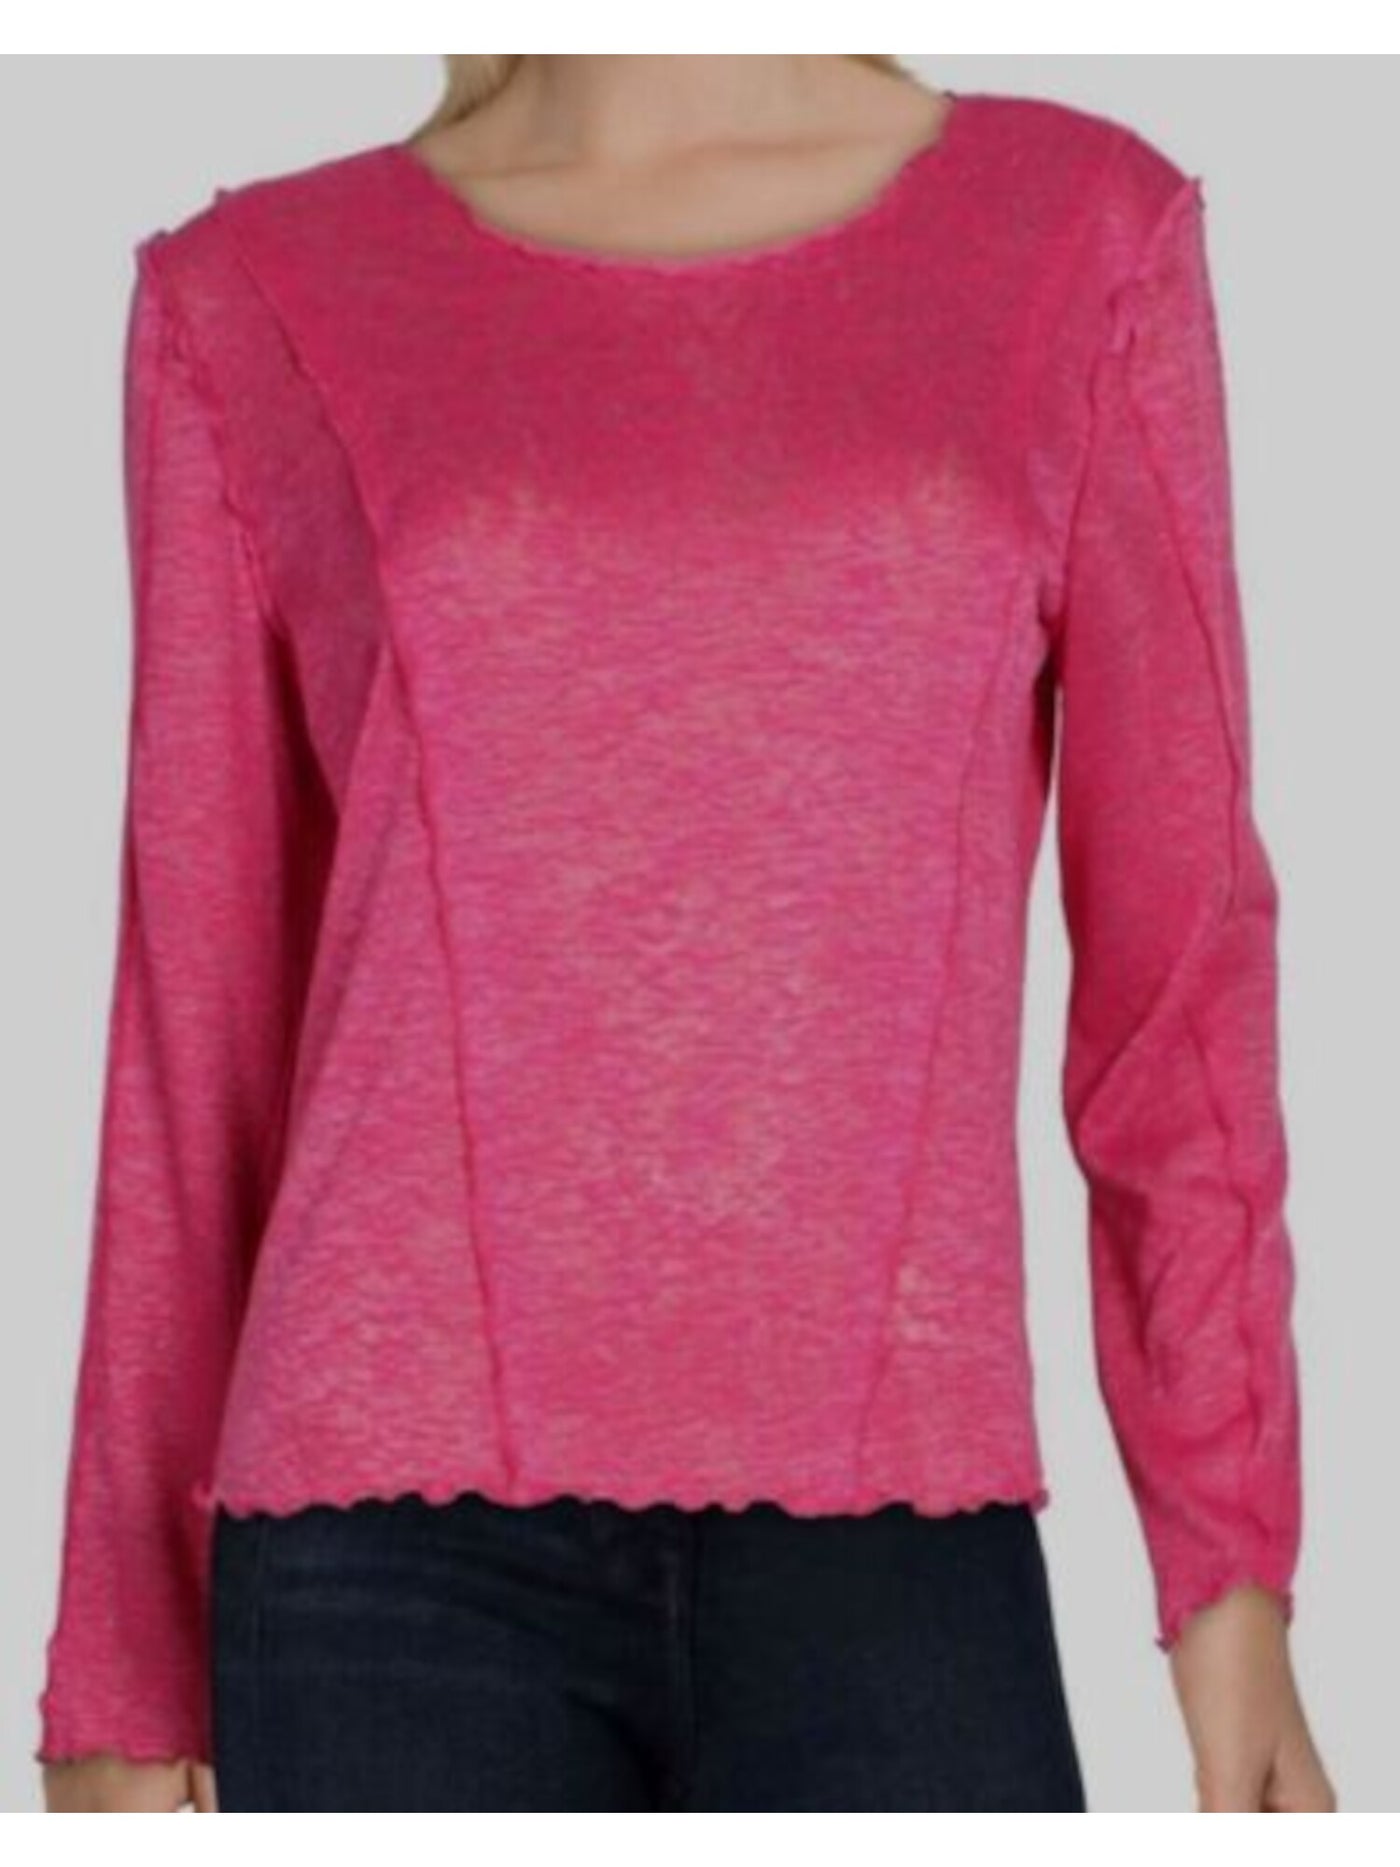 B NEW YORK Womens Pink Stretch Scalloped Seam Detail Heather Long Sleeve Round Neck Top M